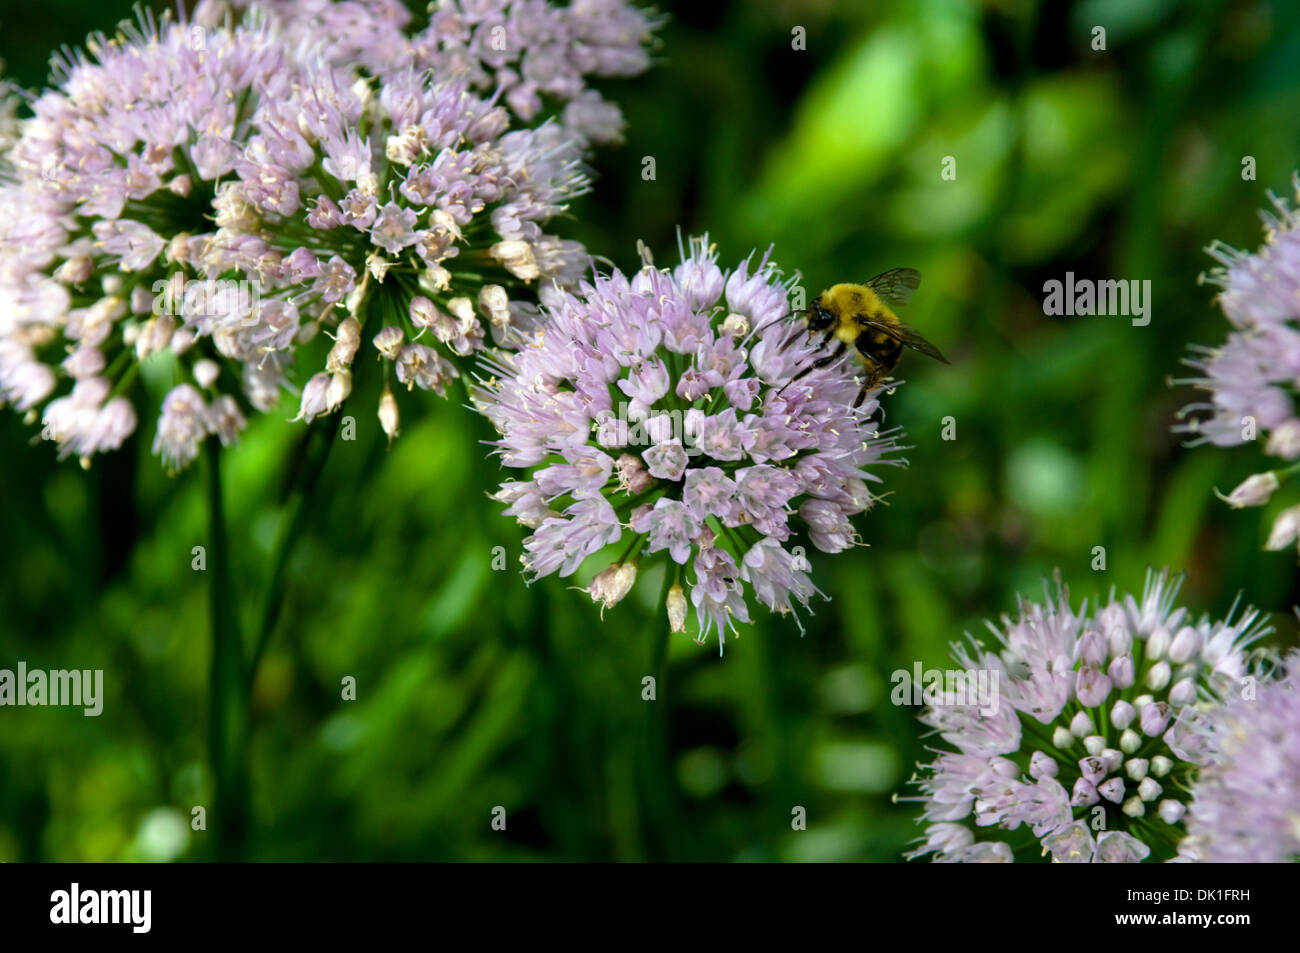 Allium flowers with bees upon them. Stock Photo